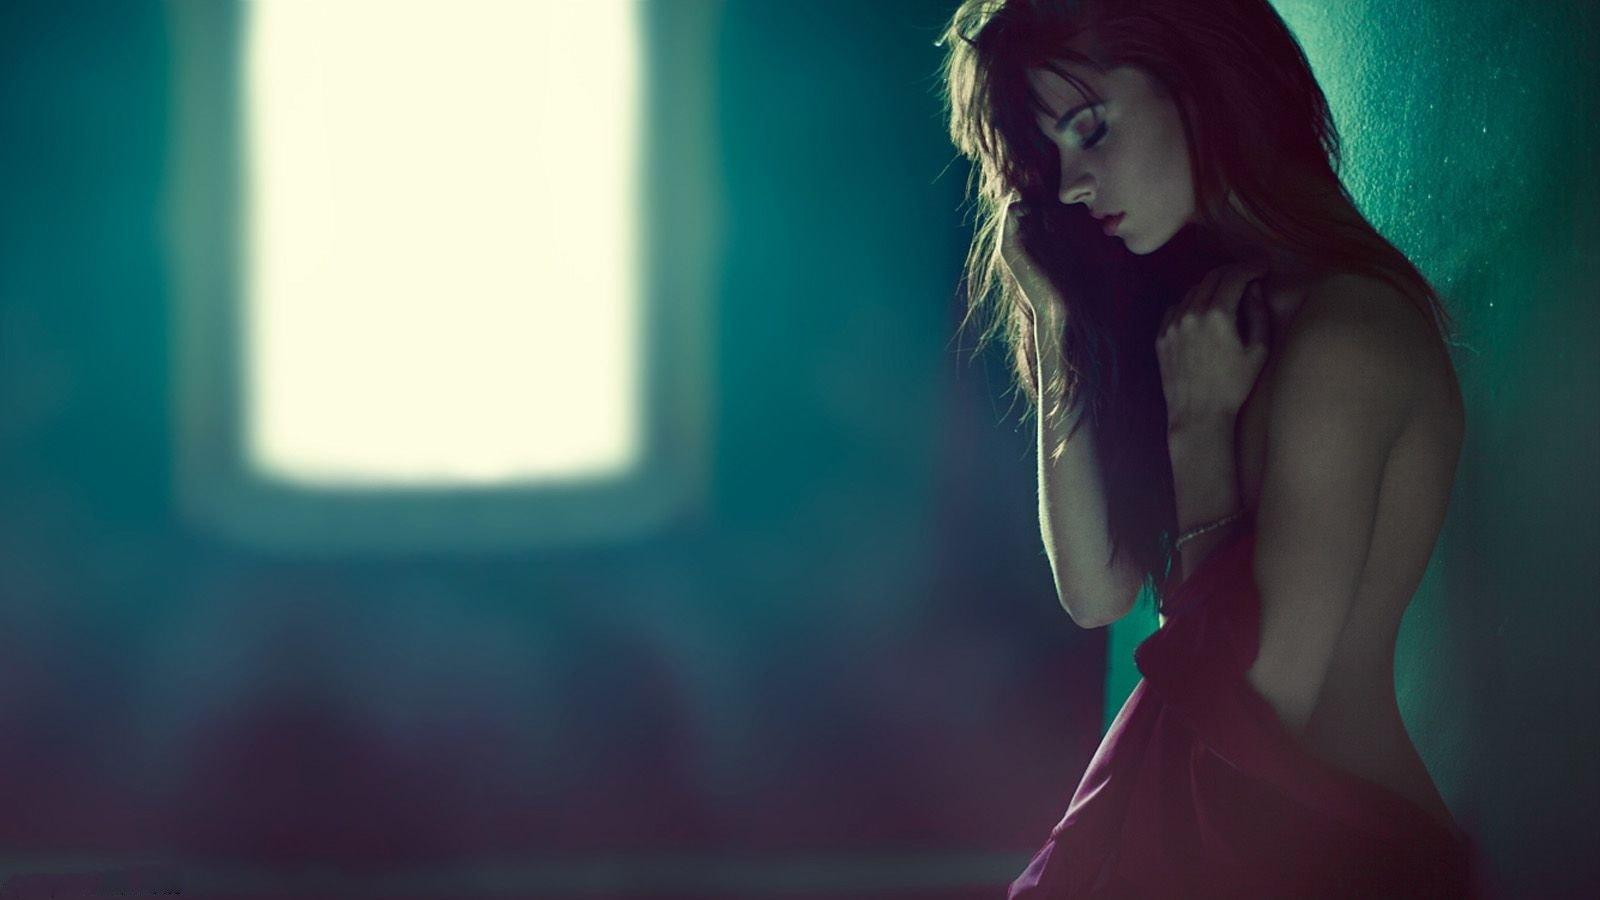 A Girl With Red Dress Sad After Breakup Wallpaper Free